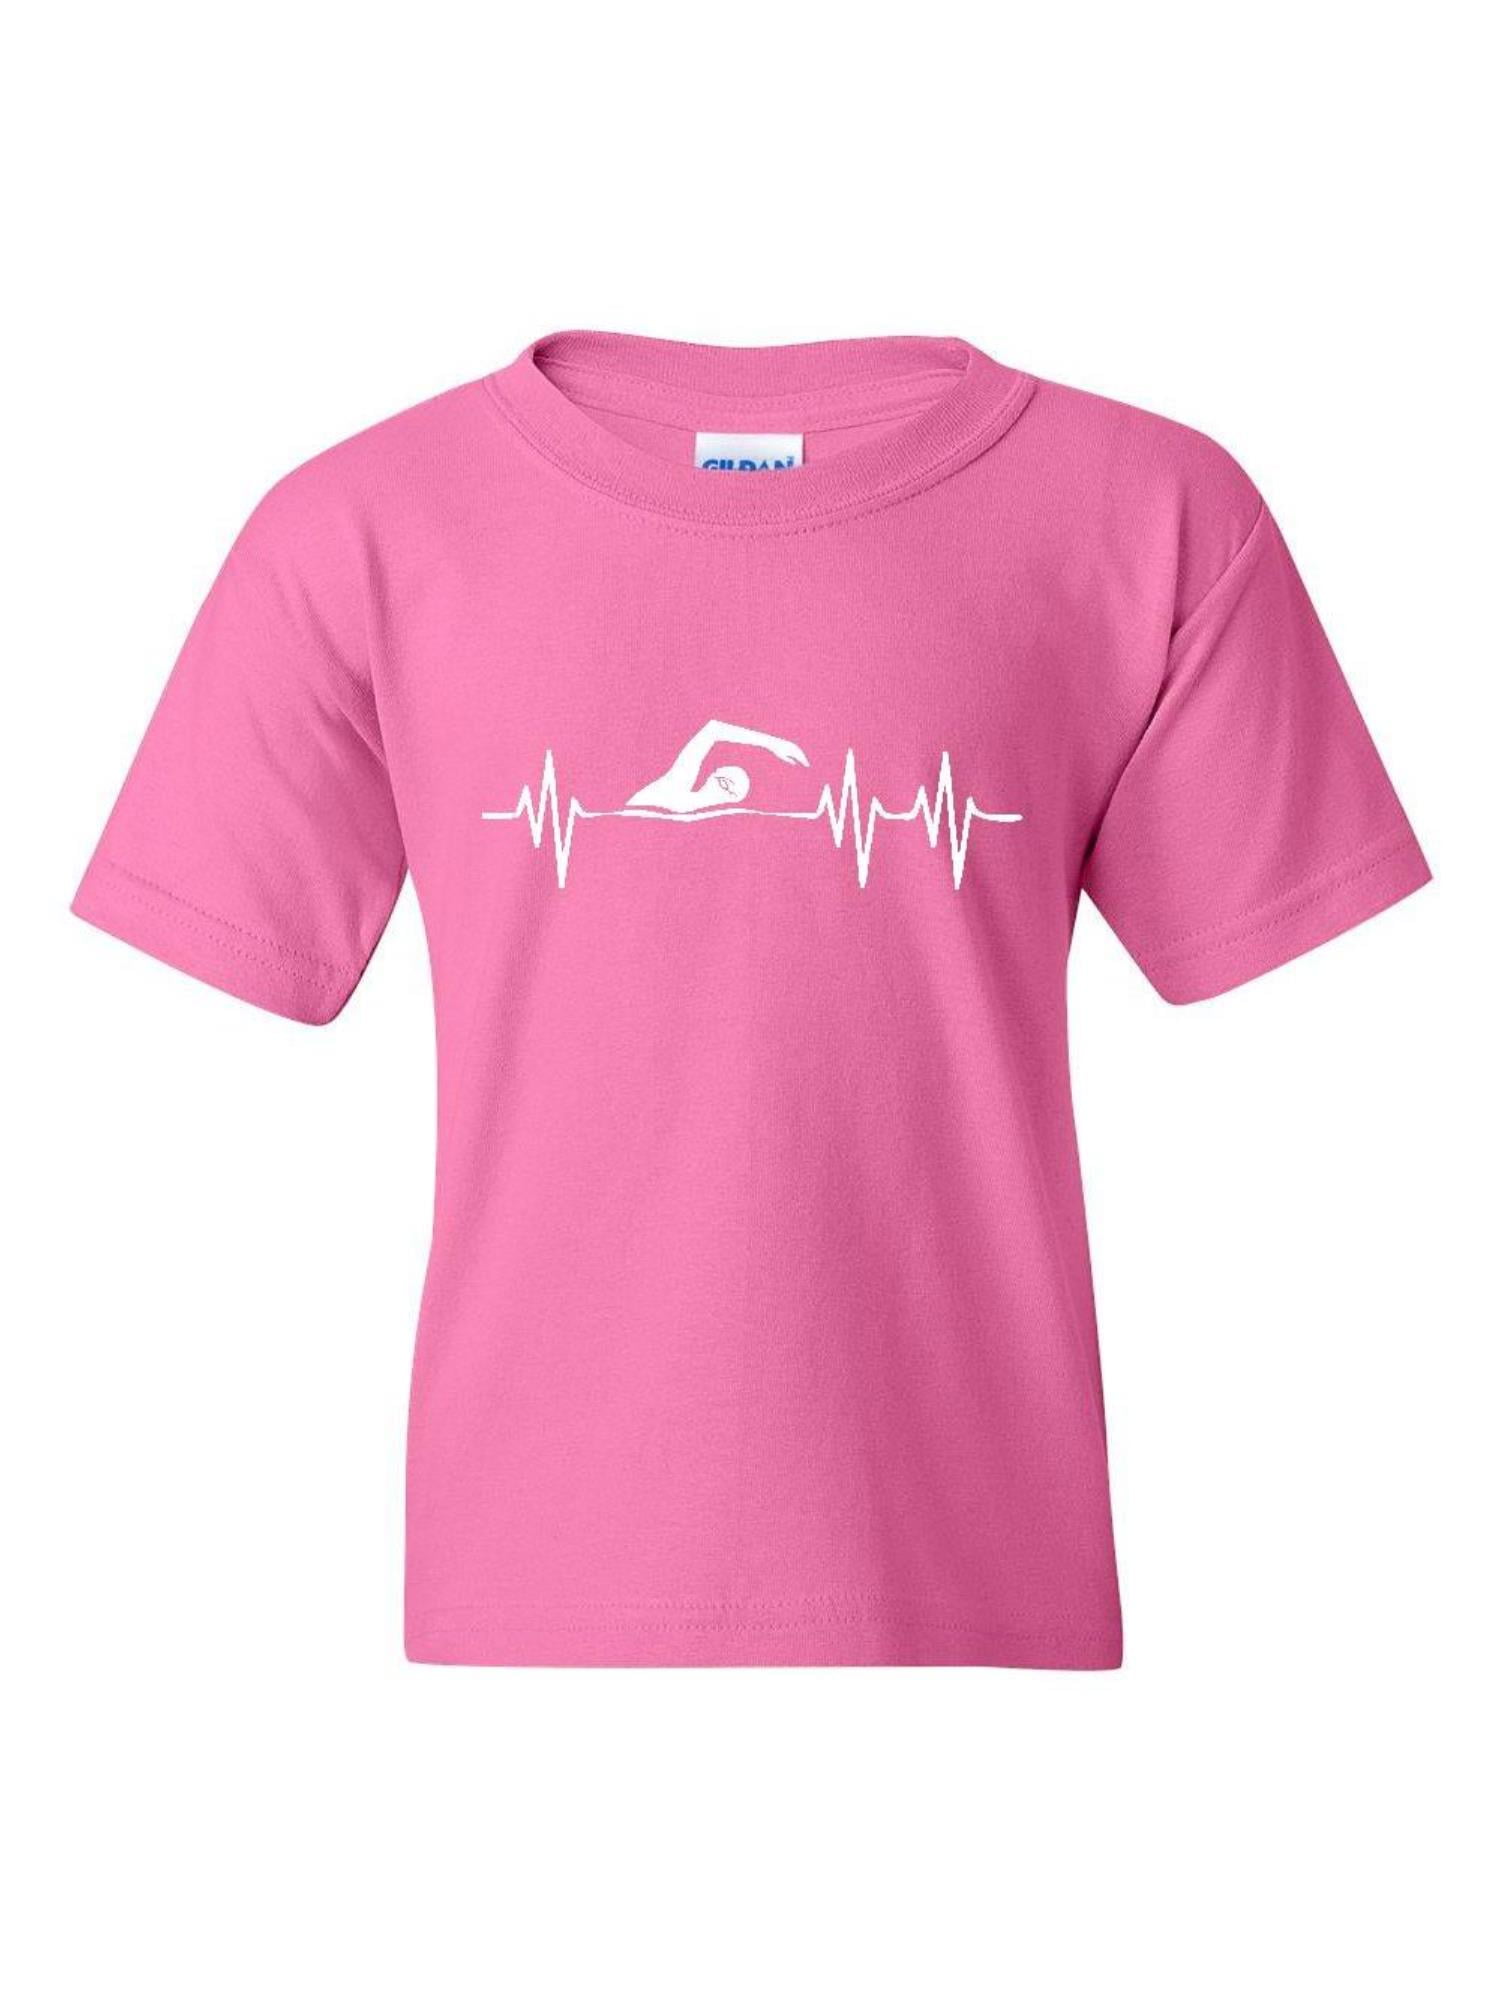 IWPF - Youth Swimming Swimmer T-Shirt For Girls and Boys - Walmart.com ...